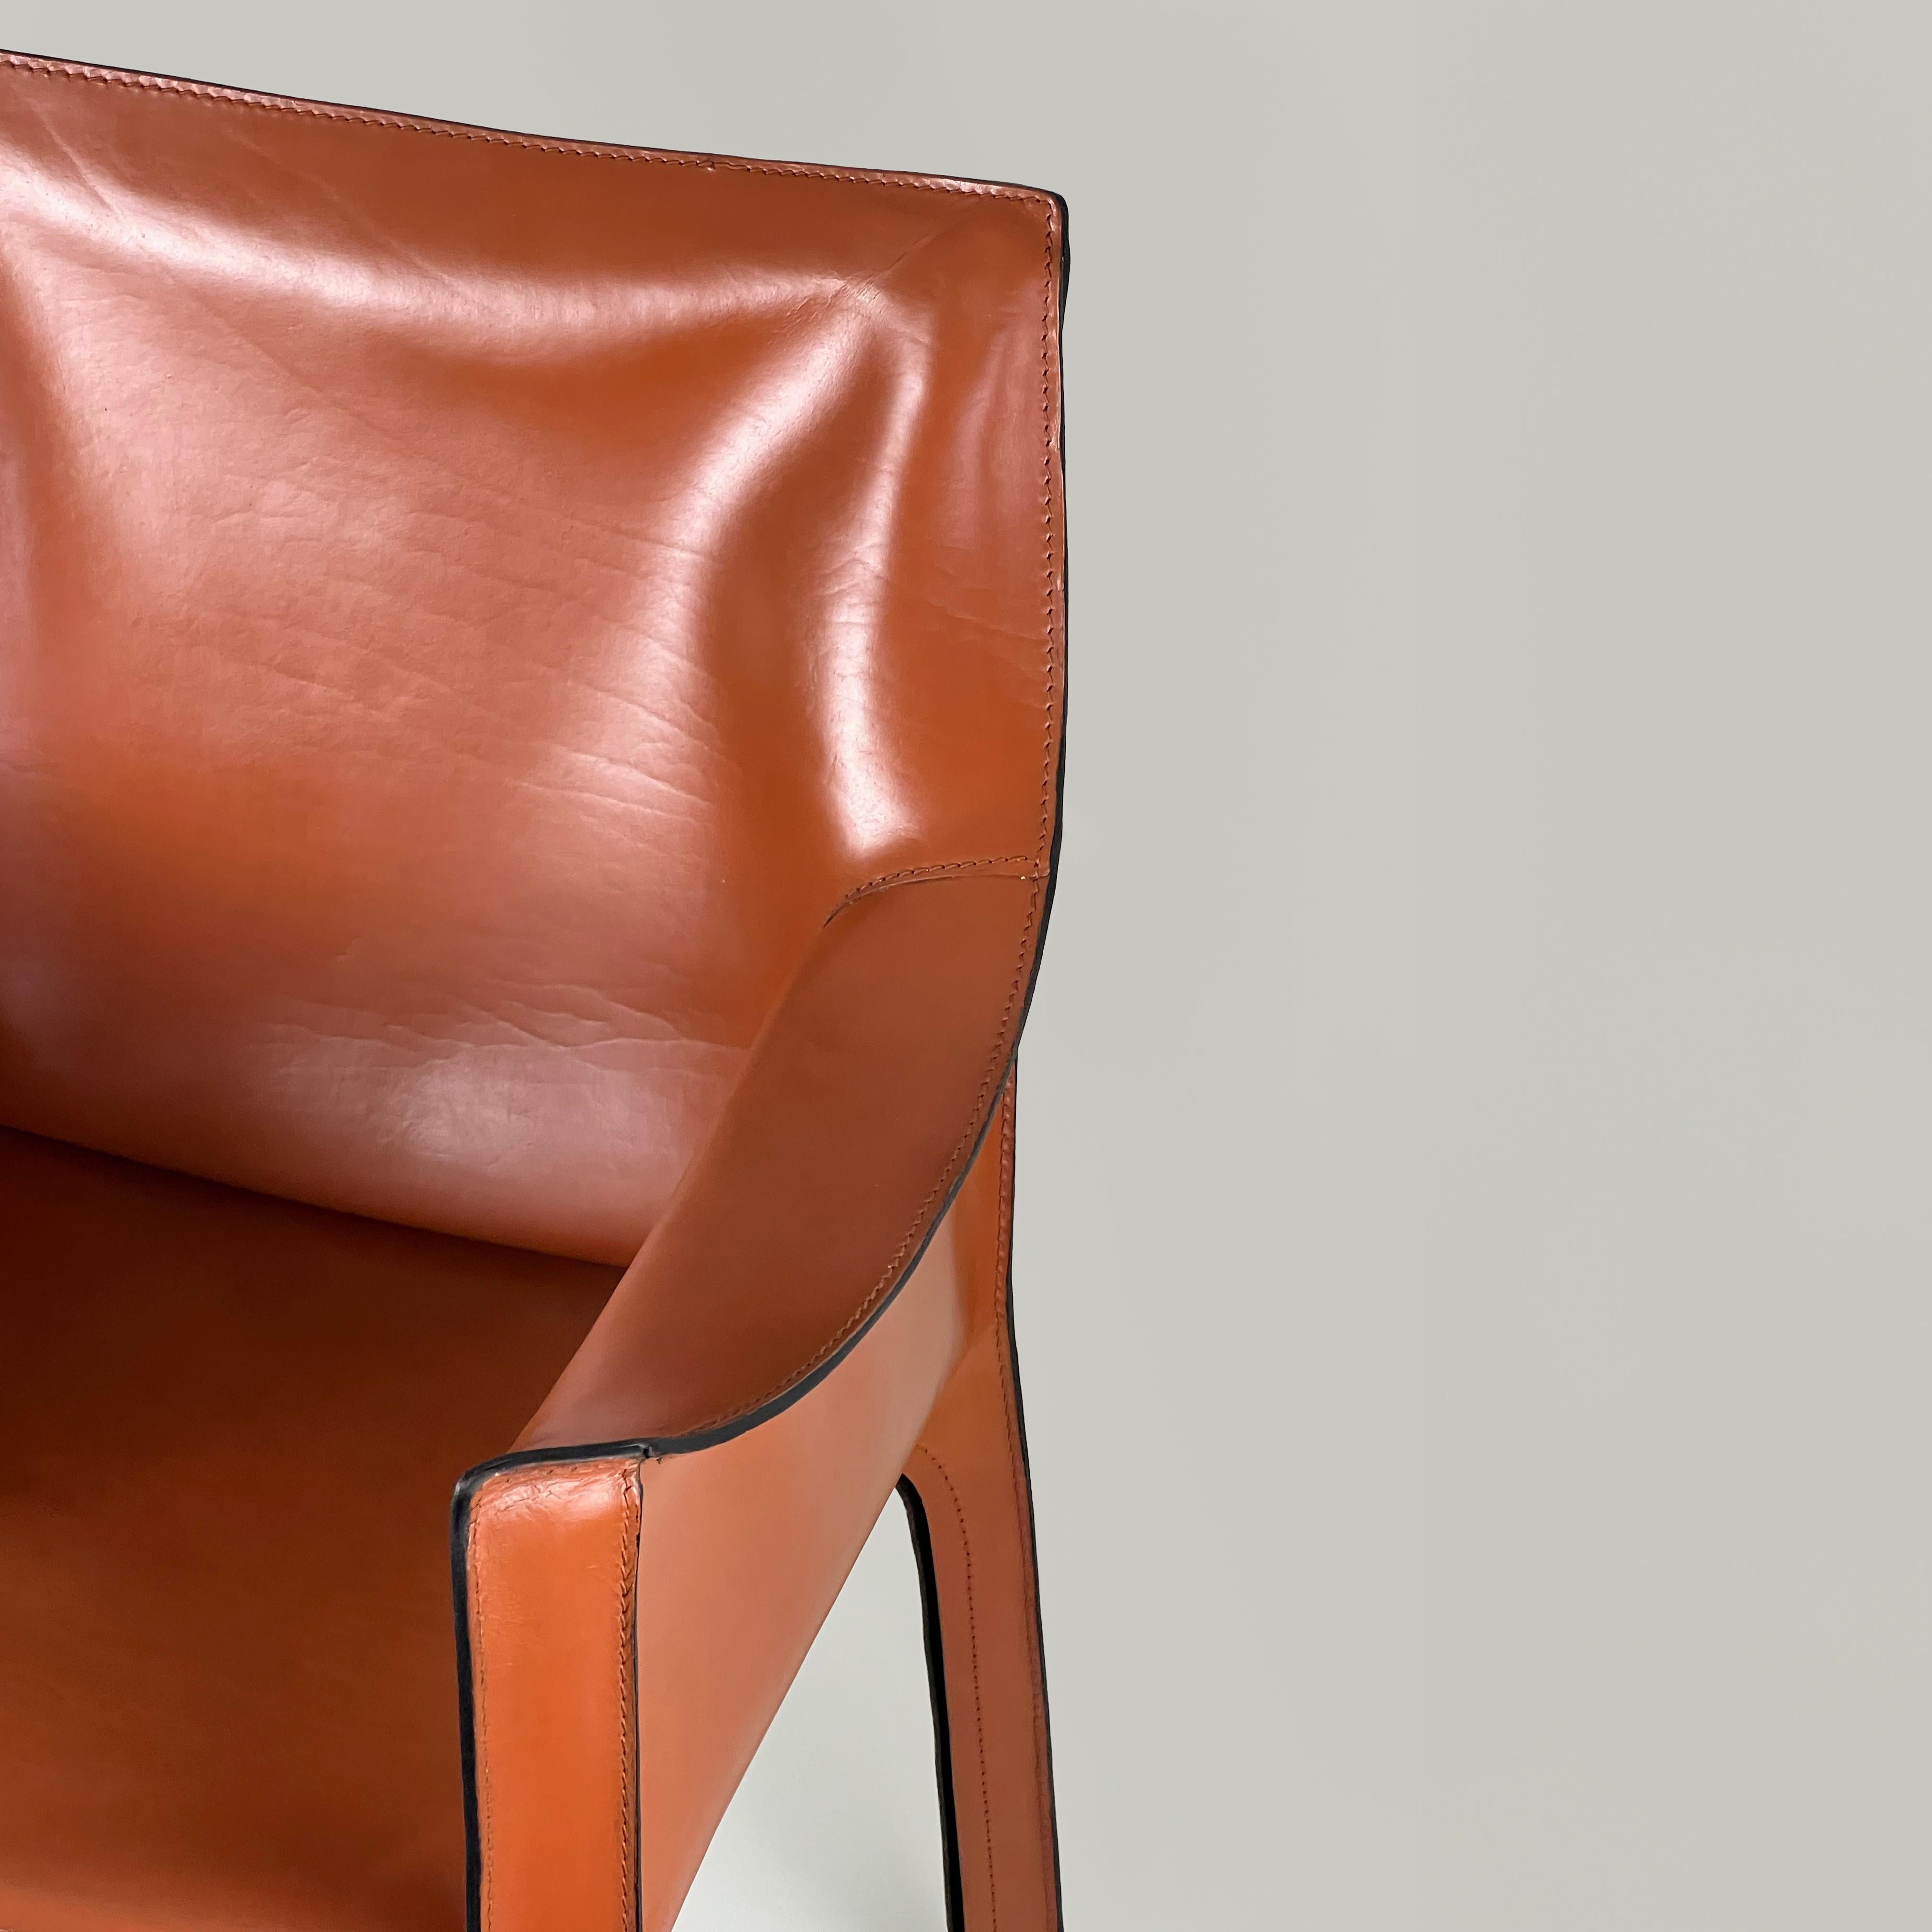 Italian CAB 413 cognac leather armchair by Mario Bellini for Cassina, Italy 1970s For Sale